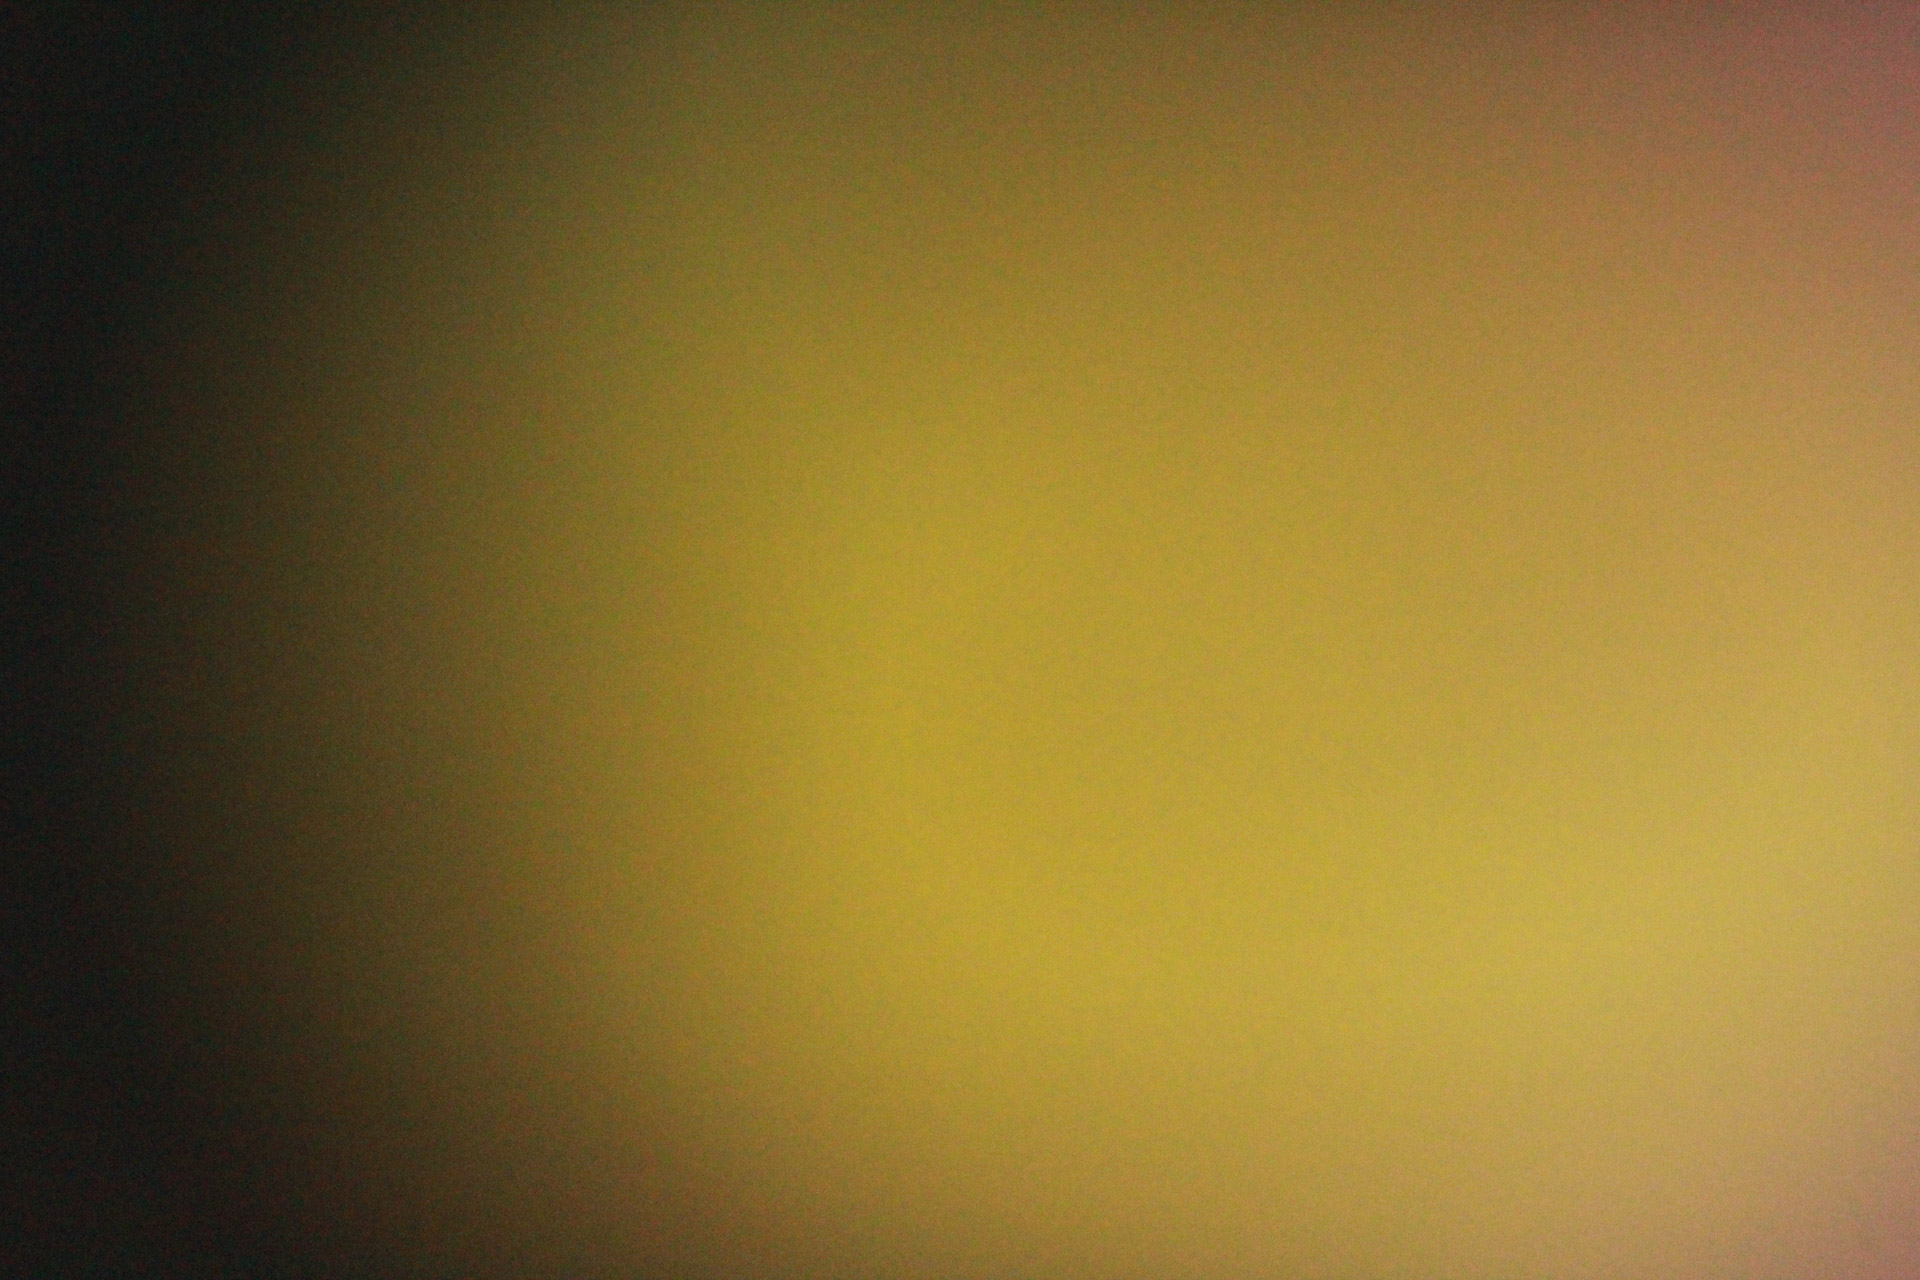 Yellow And Black Blur Background Free Stock Photo HD   Public Domain